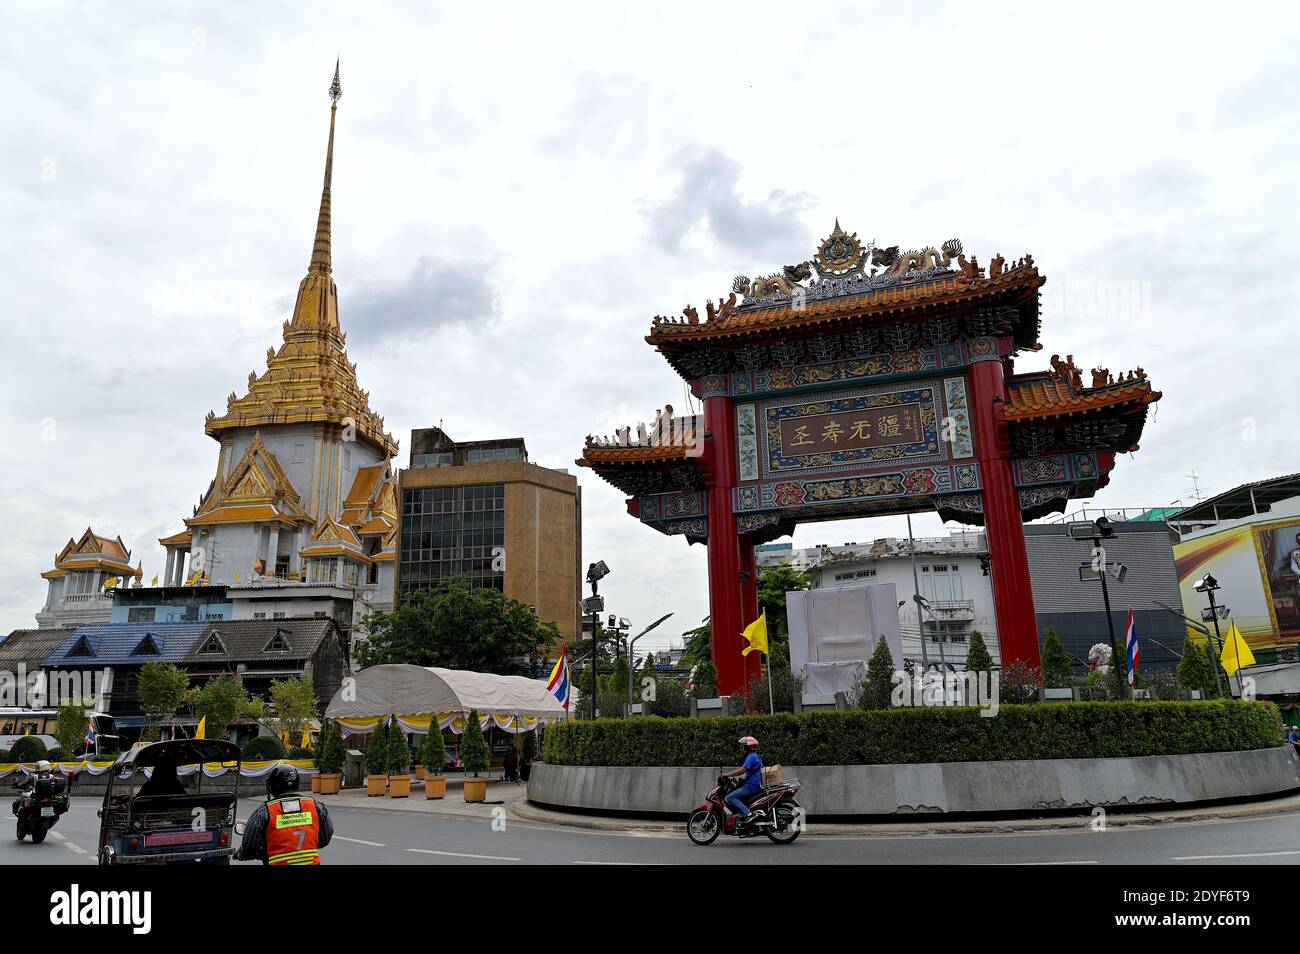 View of Chinatown Gate and Wat Traimit, Yaowarat, Bangkok. The ornate gate was inaugurated in 1999 to celebrate the King’s 60th year on the throne. Stock Photo